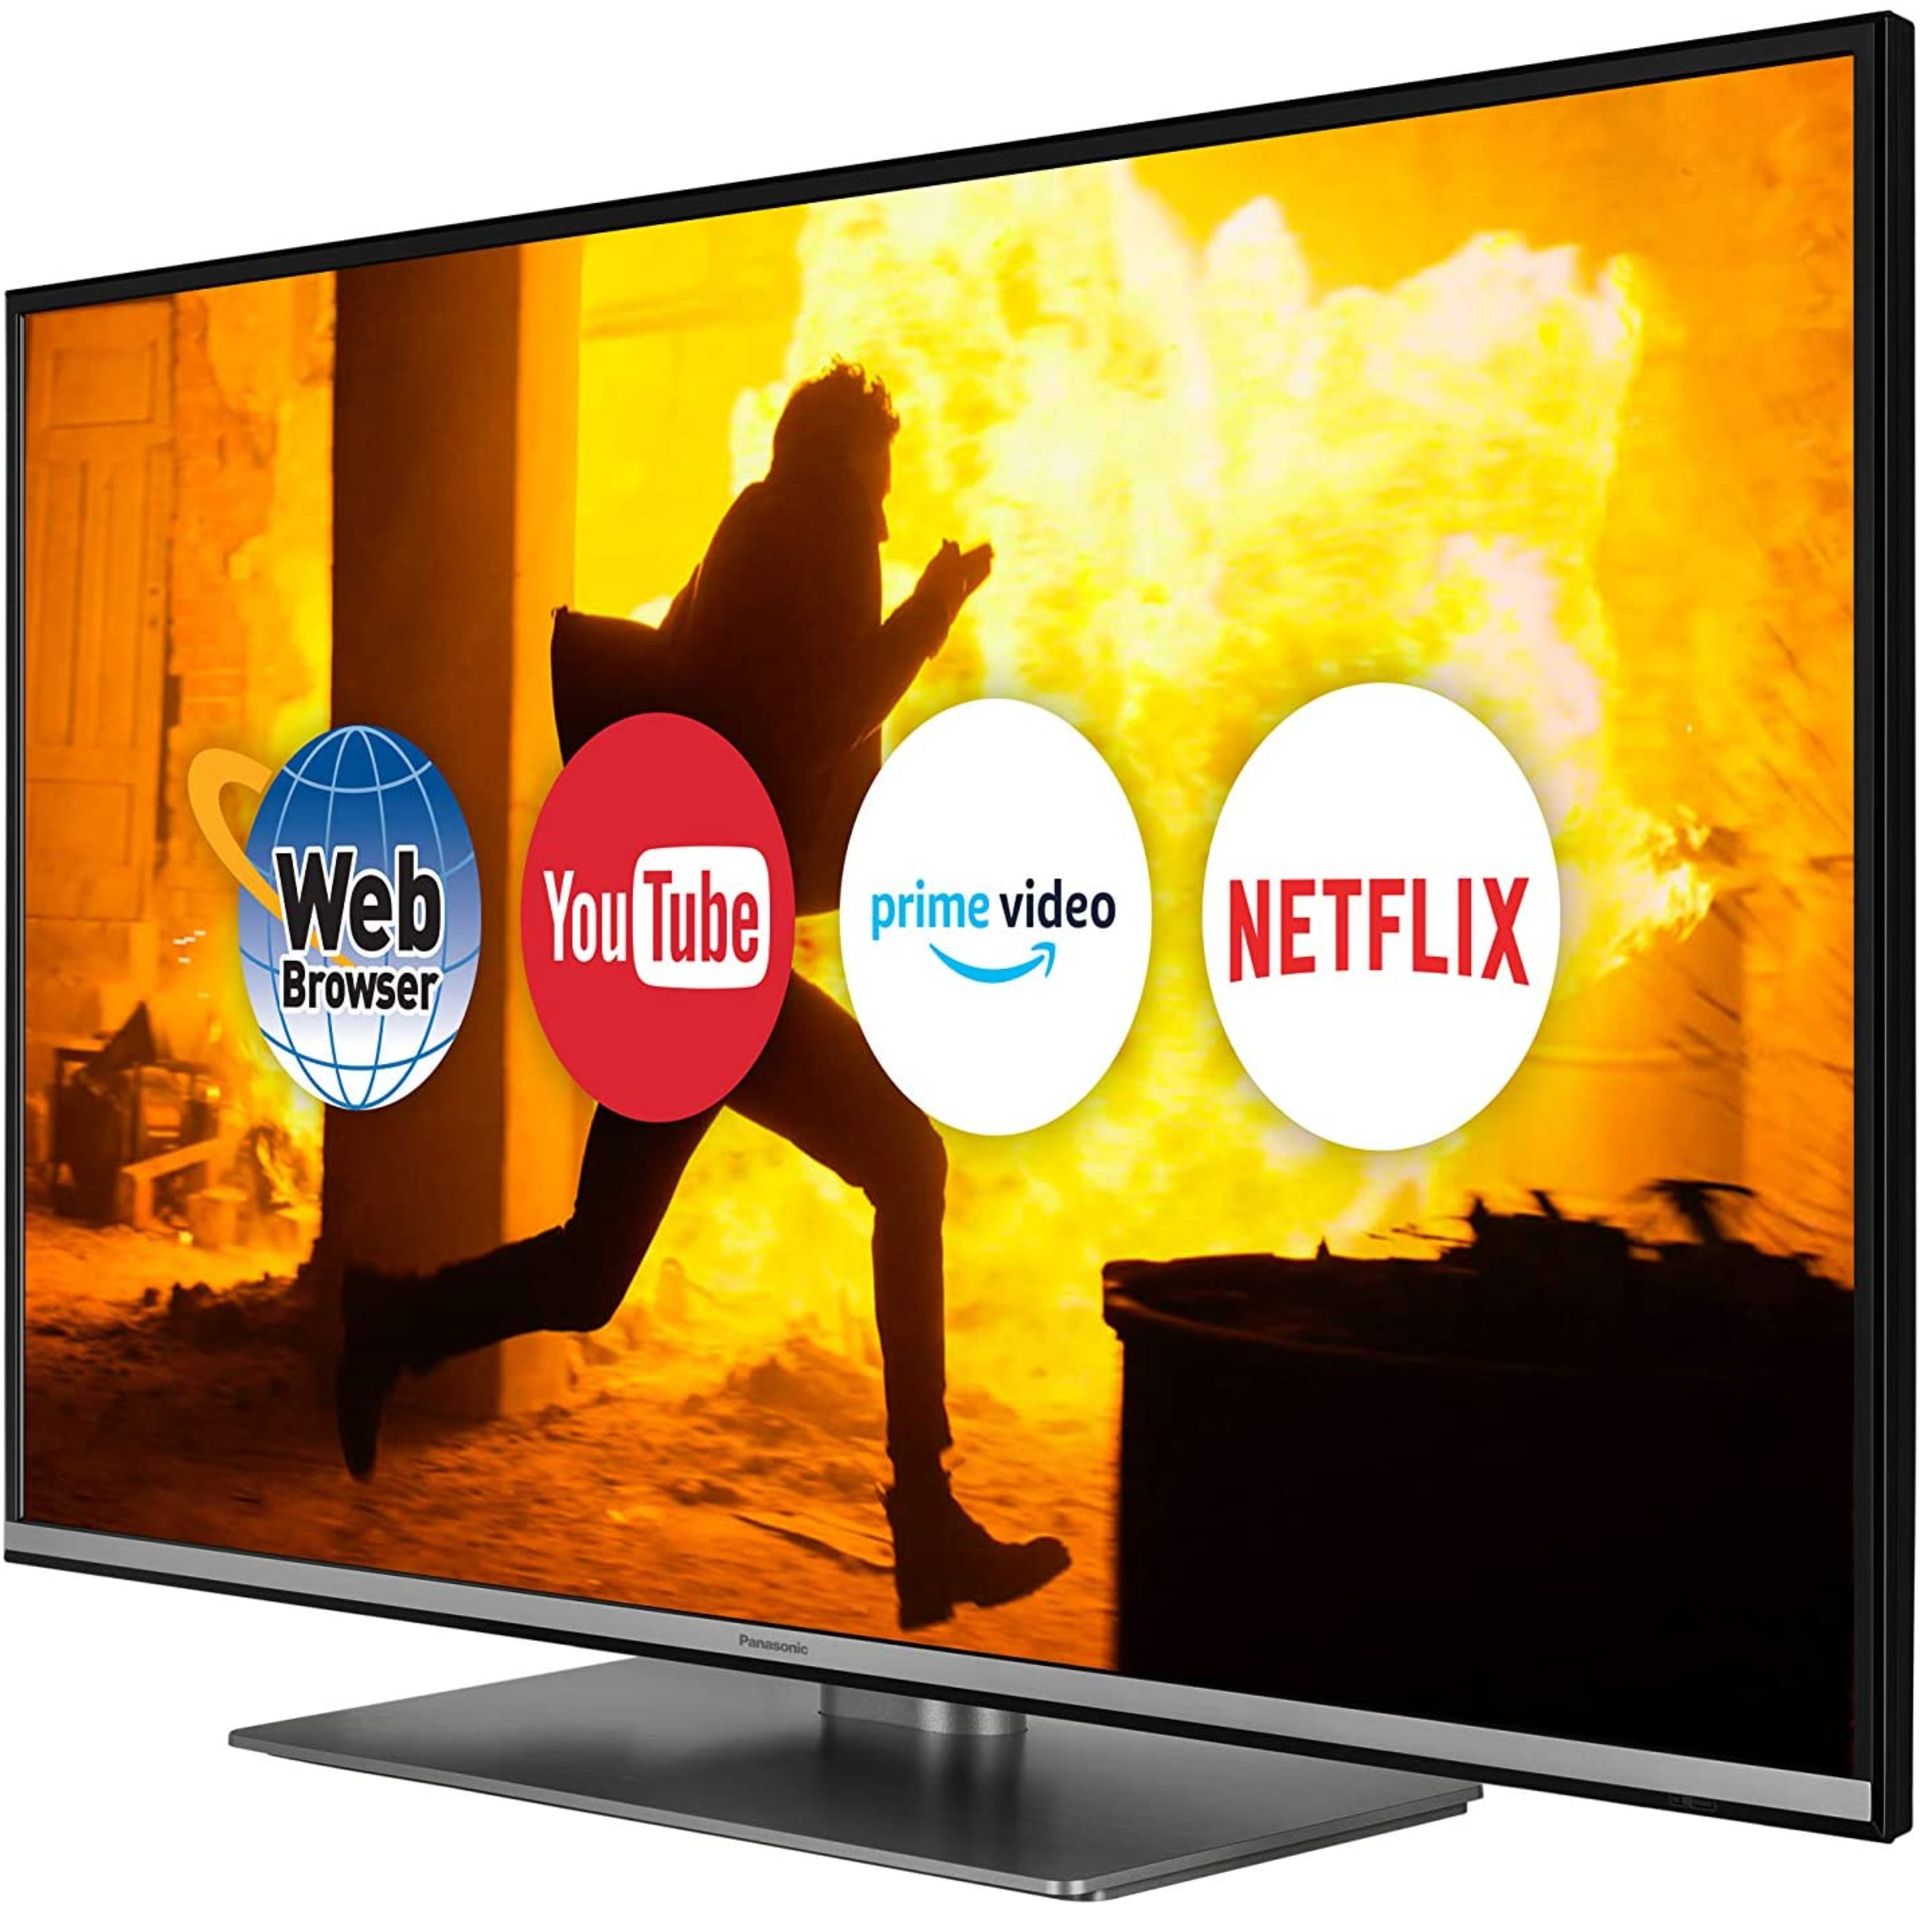 1 TOSHIBA 32 INCH SMART LED TV HD READY FREEVIEW PLAY DVD PLAYER WITH REMOTE RRP Â£199 (BLACK